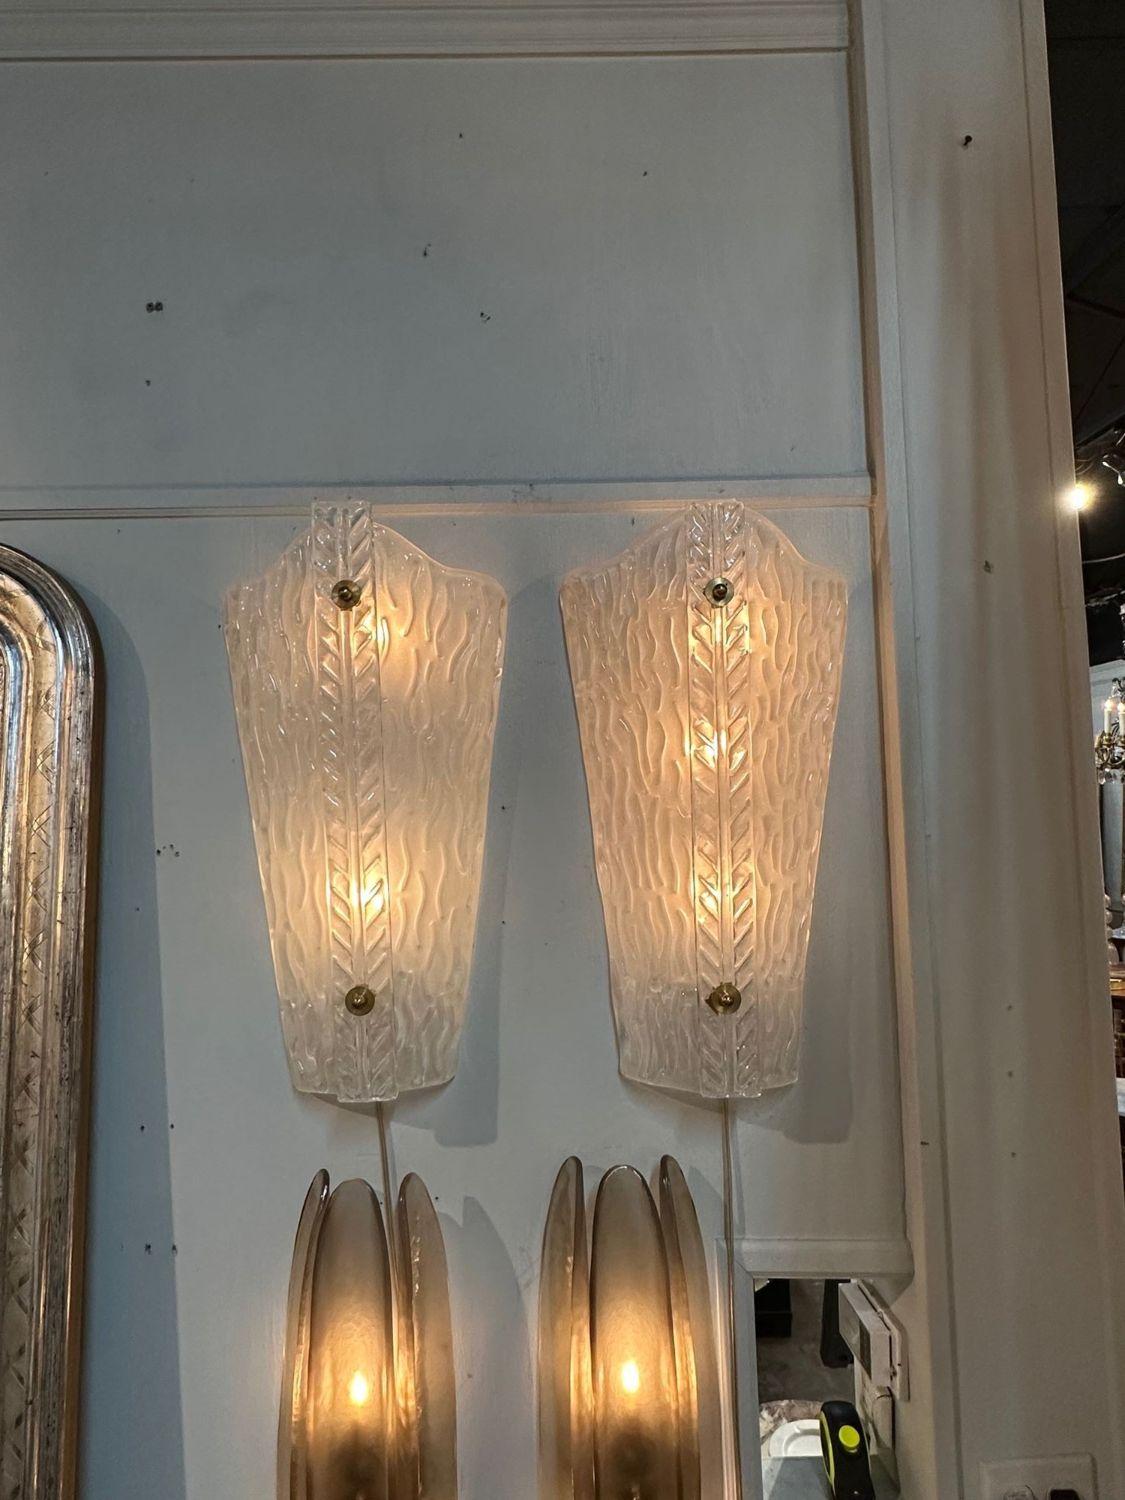 Very nice pair of frosted Murano glass sconces. Very upscale for an elegant touch!